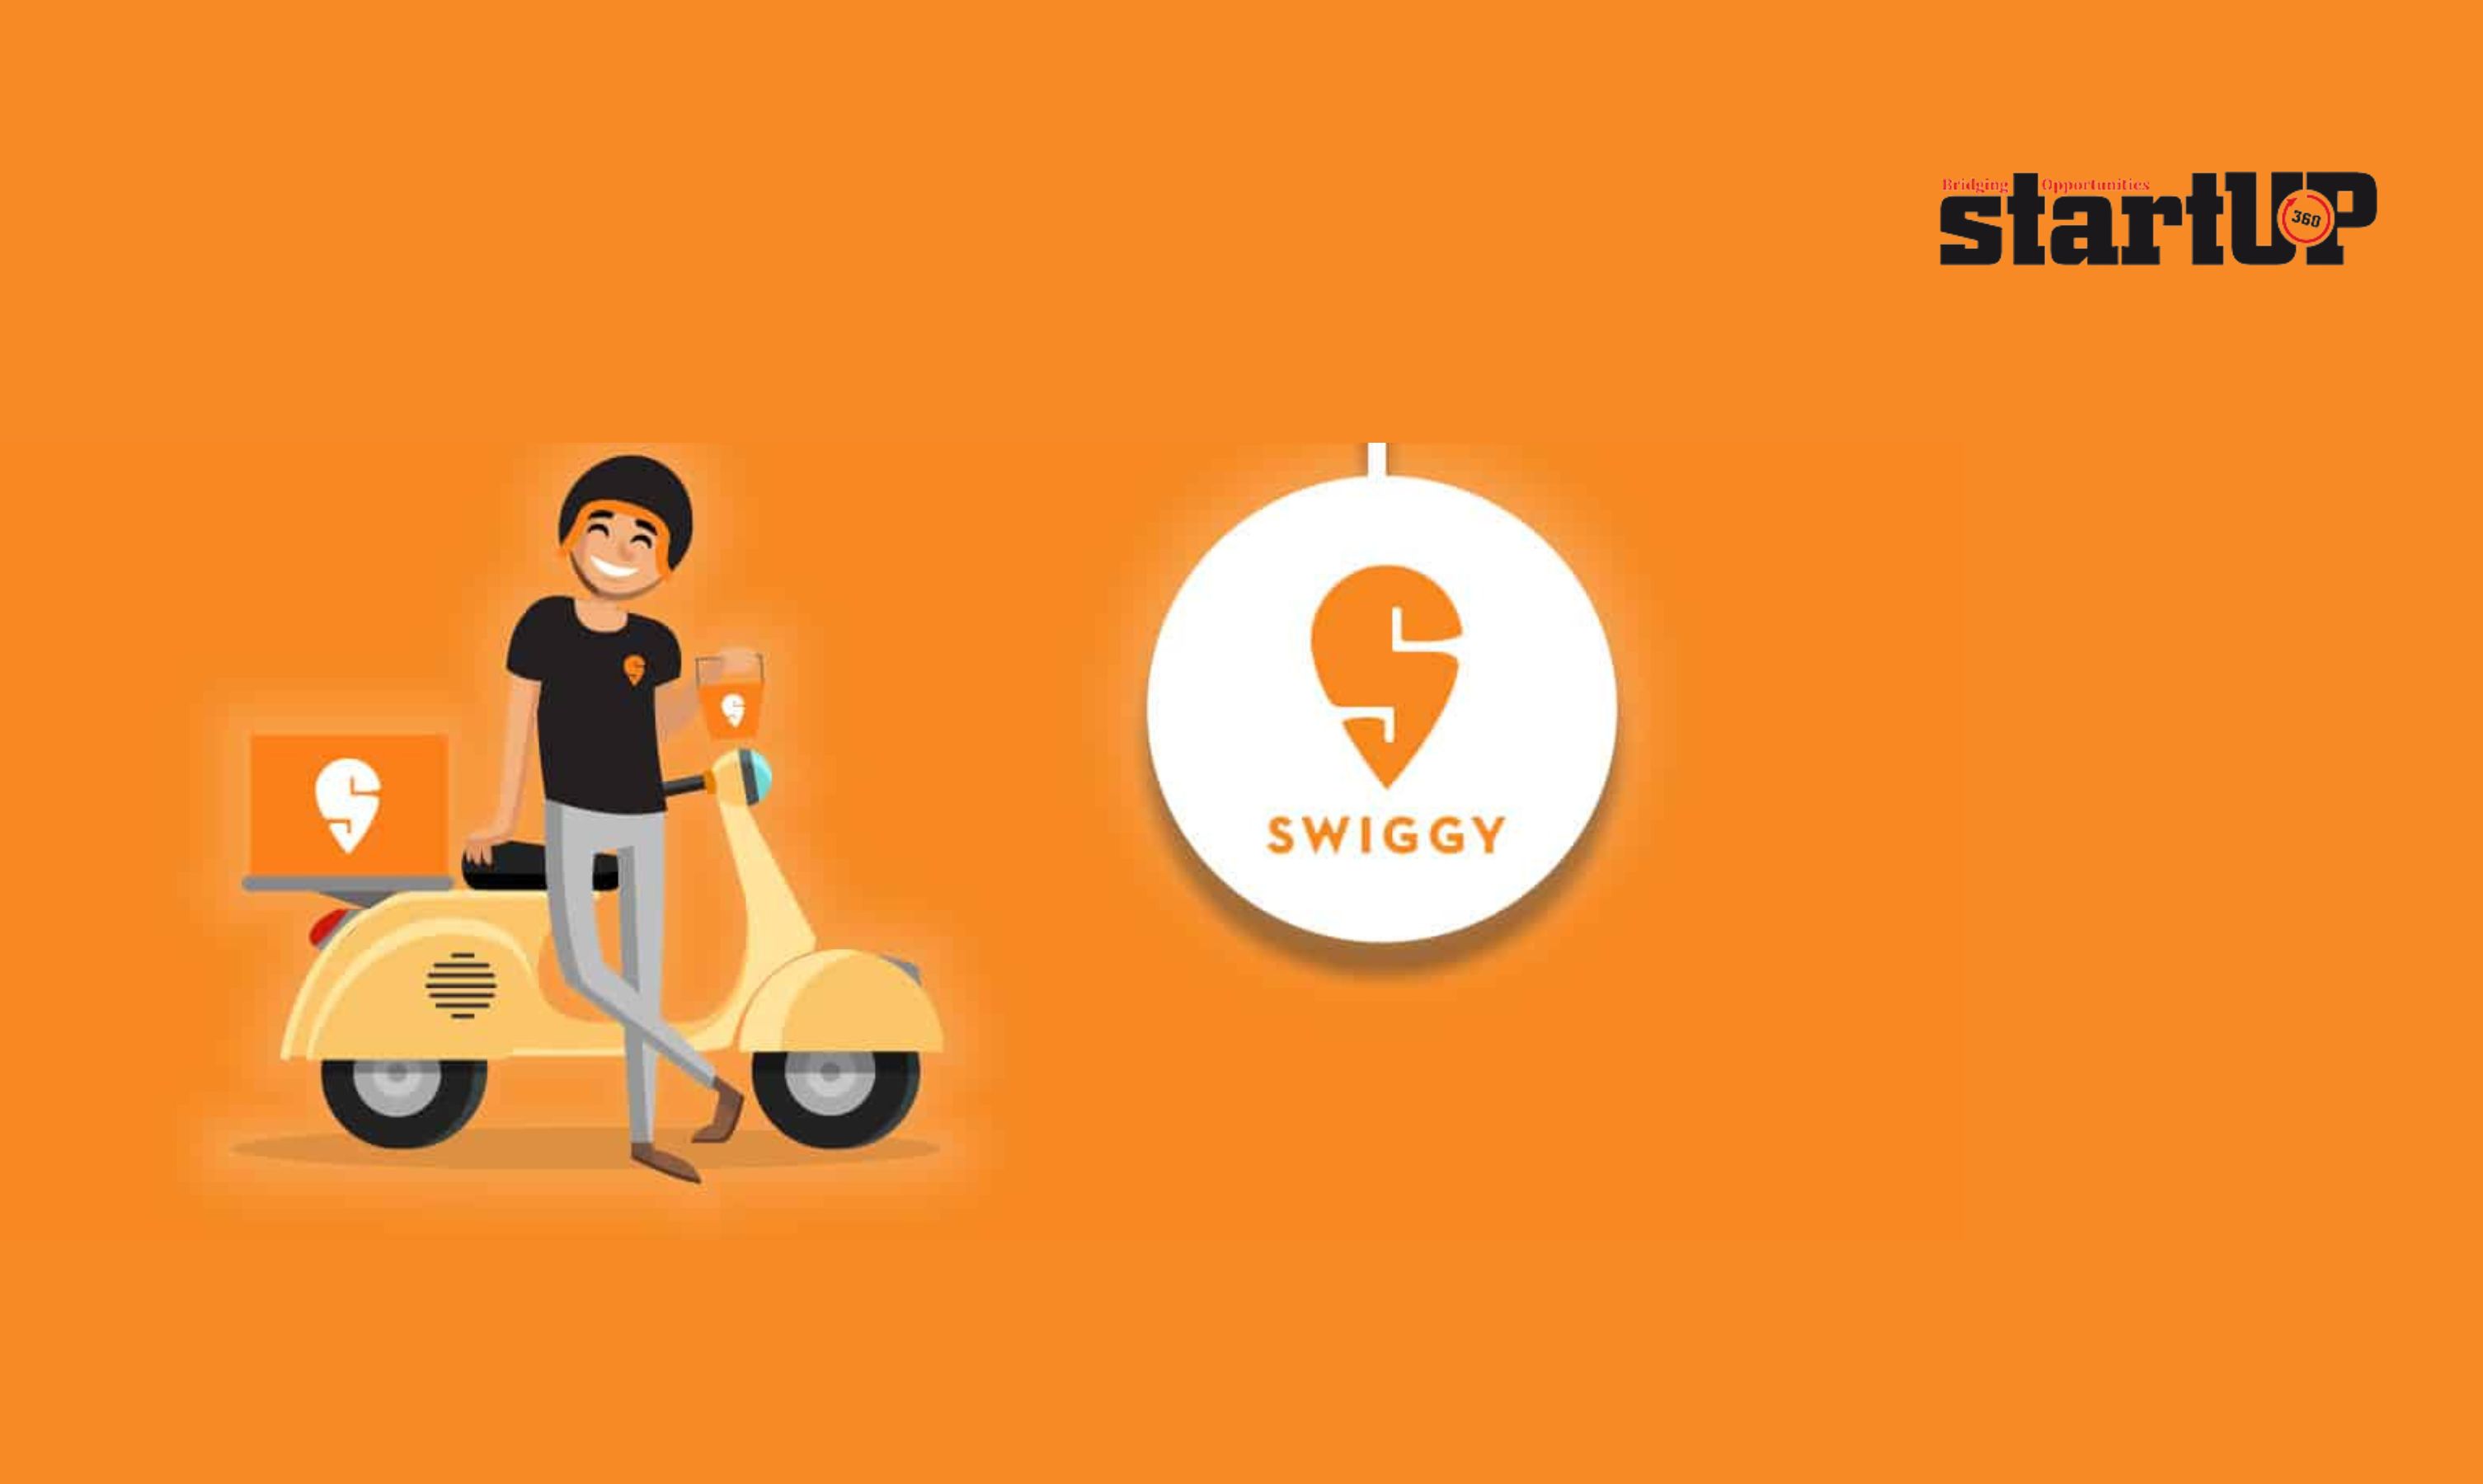 Swiggy Steps into the Fintech : Plans to launch Co-Branded Credit Card